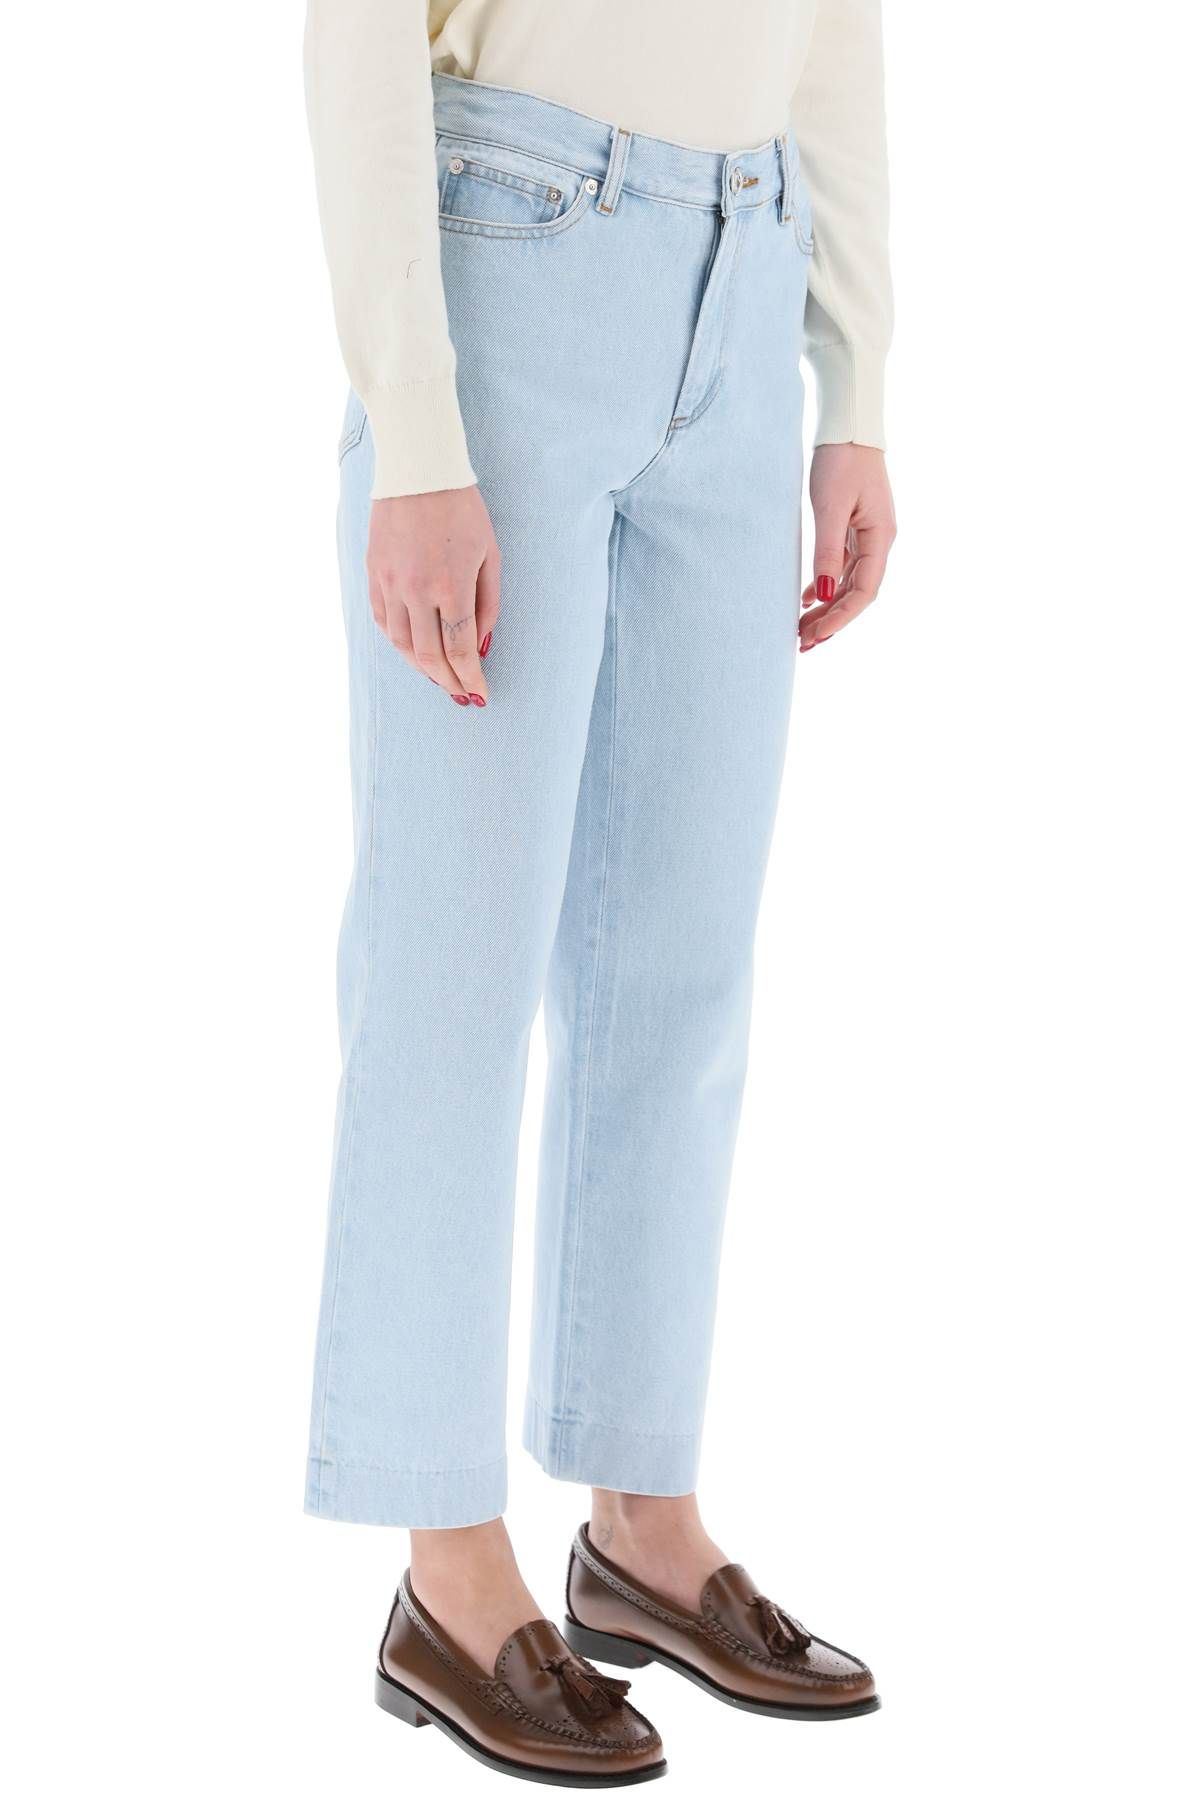 Shop Apc New Sailor Straight Cut Cropped Jeans In Light Blue